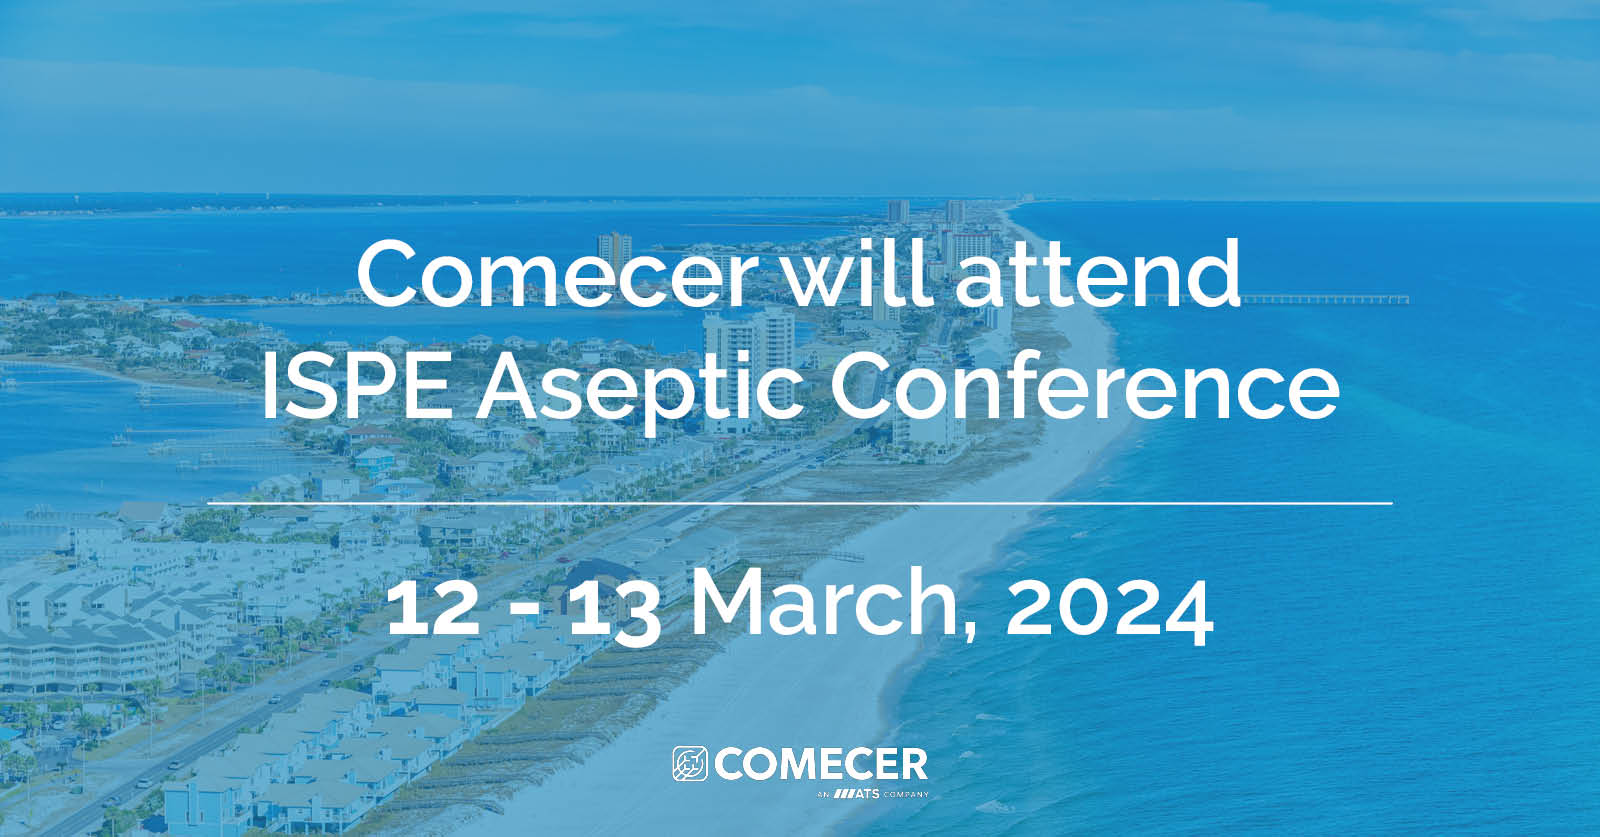 Comecer at the ISPE Aseptic Conference 2024